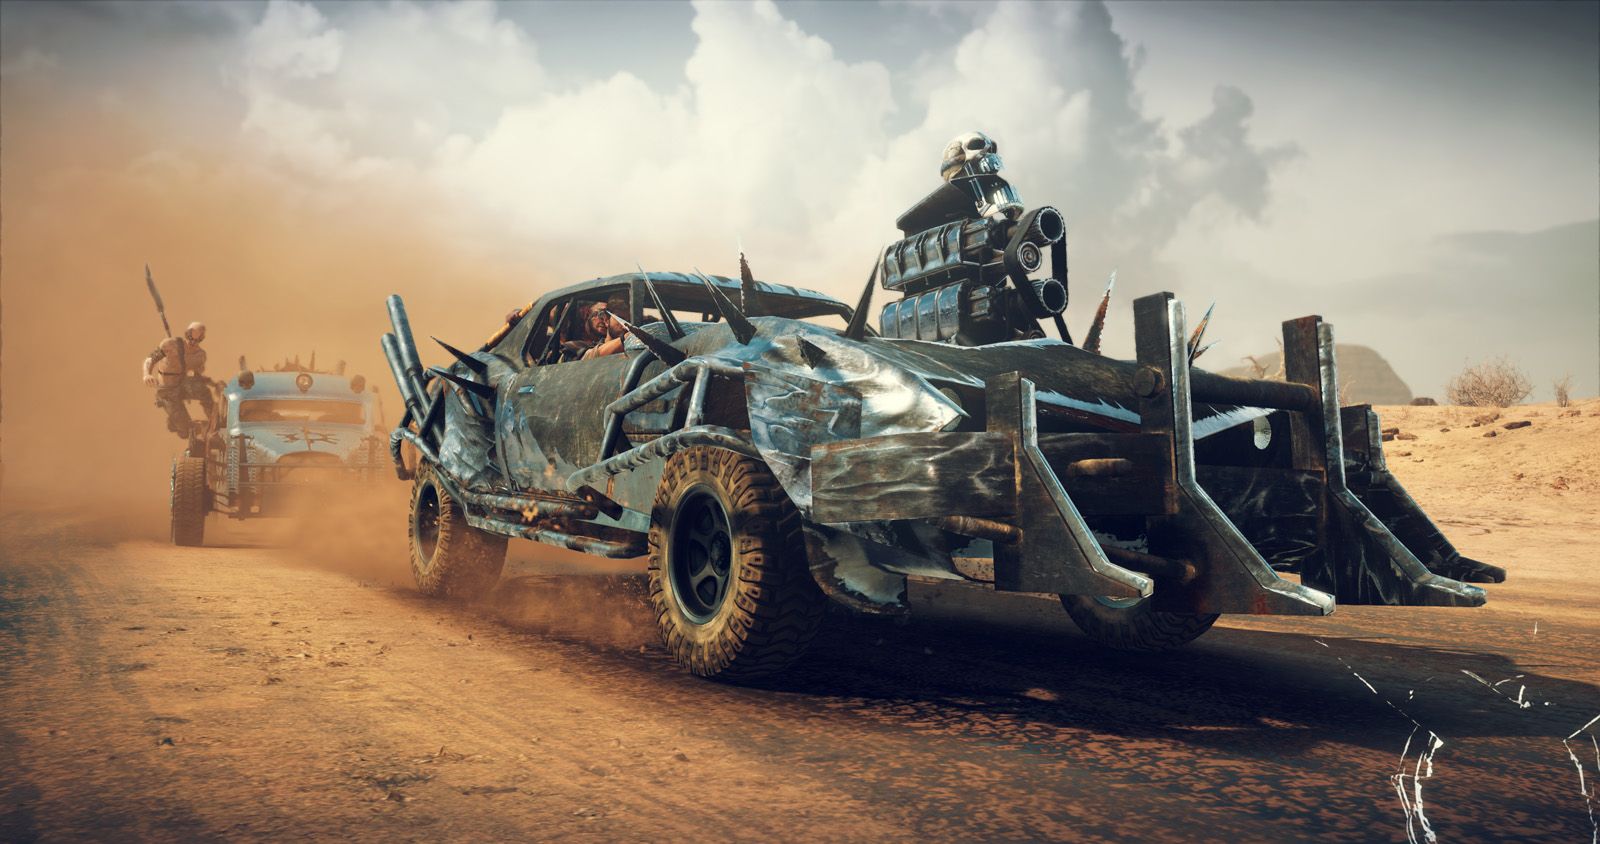 mad max first look review image 1